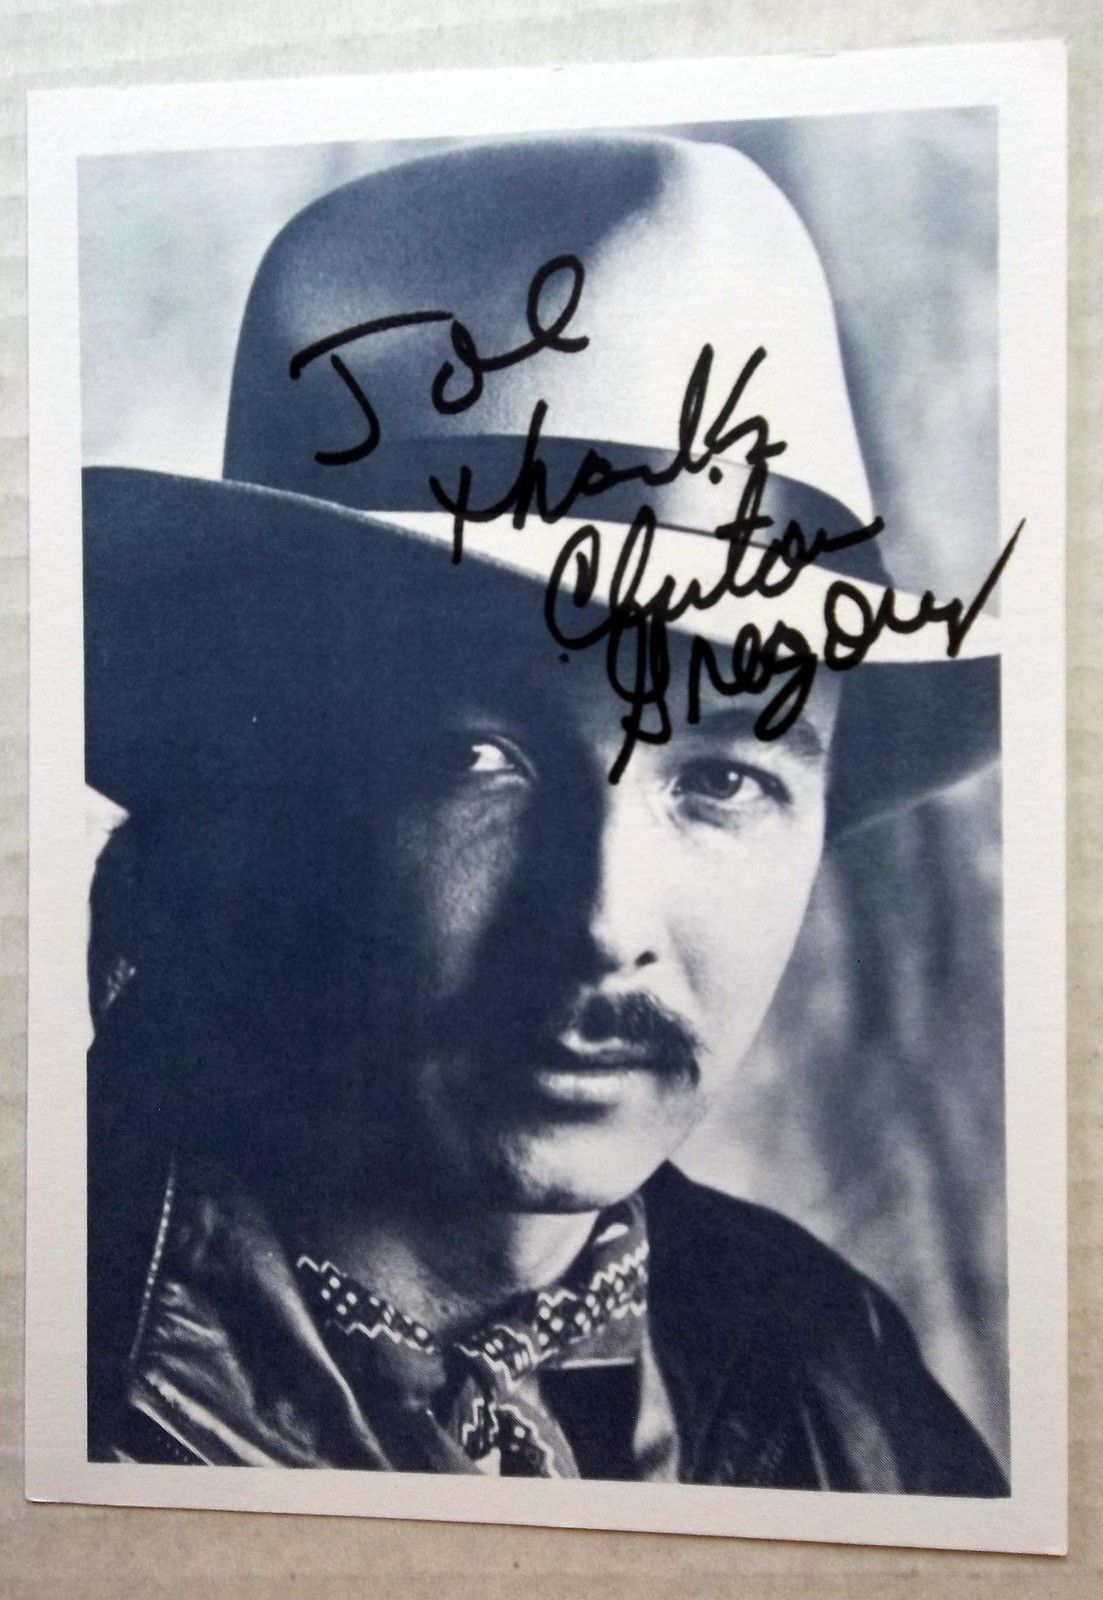 CLINTON GREGORY Autographed POSTCARD Photo Poster painting Country BLUEGRASS Singer WRITER